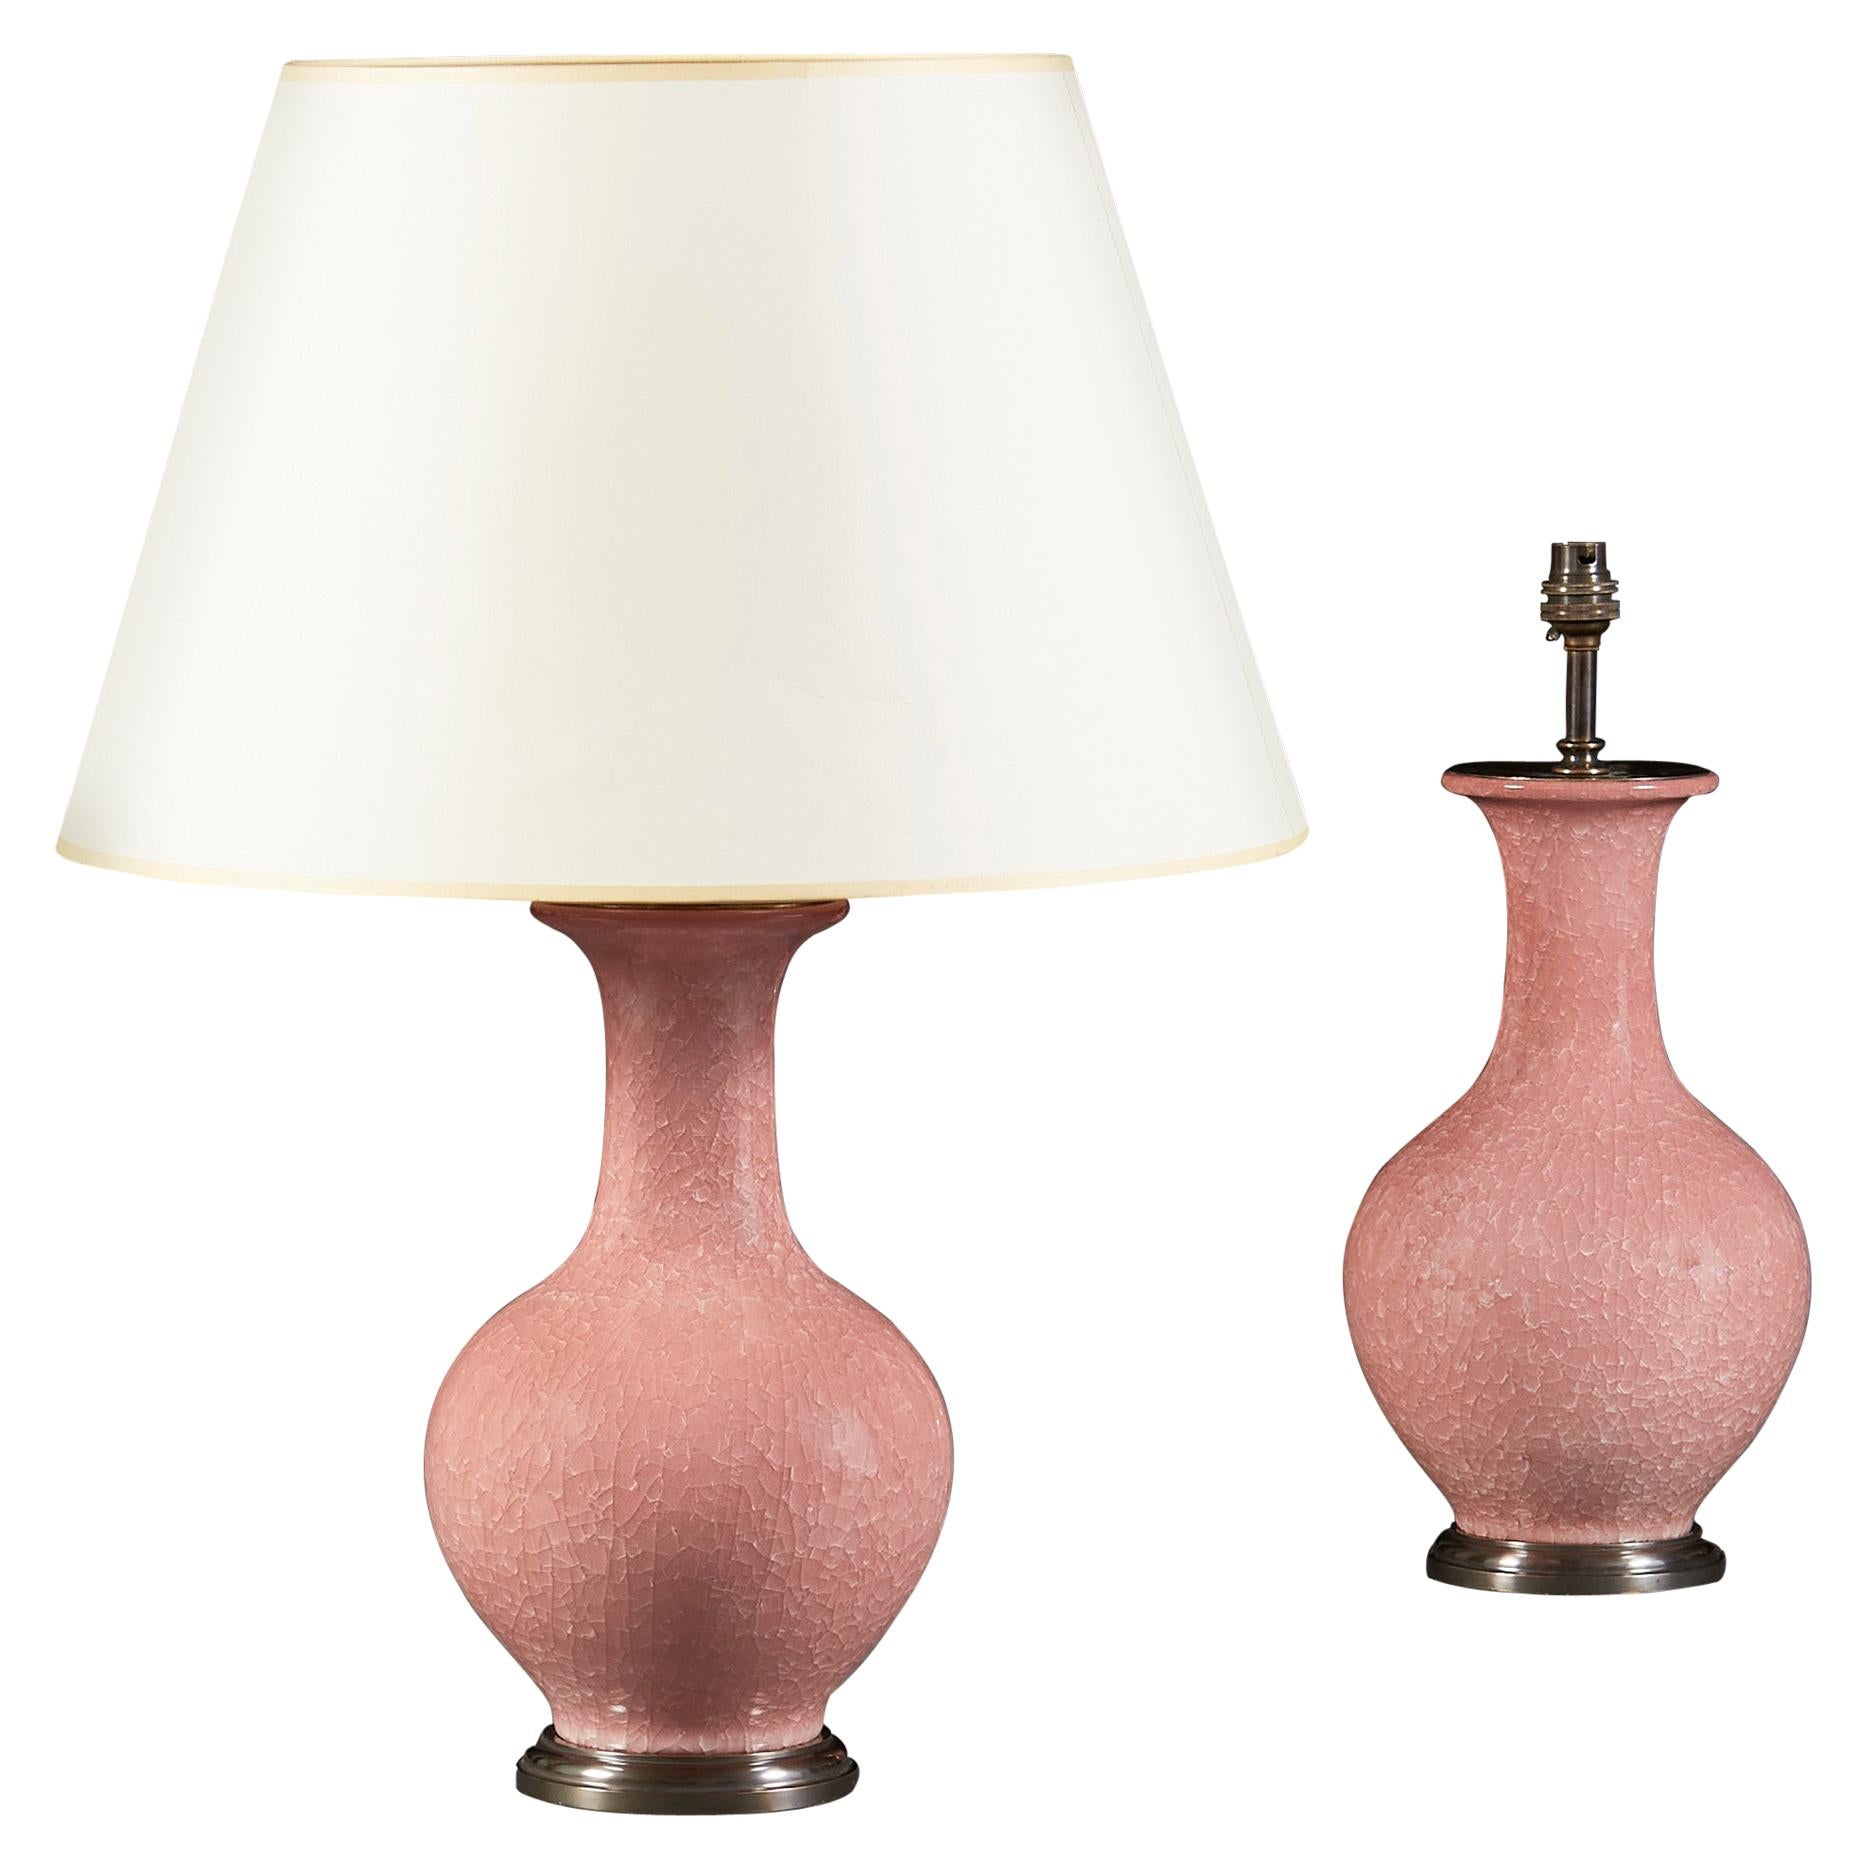 Pair of Pink Craquelure Glaze Vases as Table Lamps with Bronze Bases